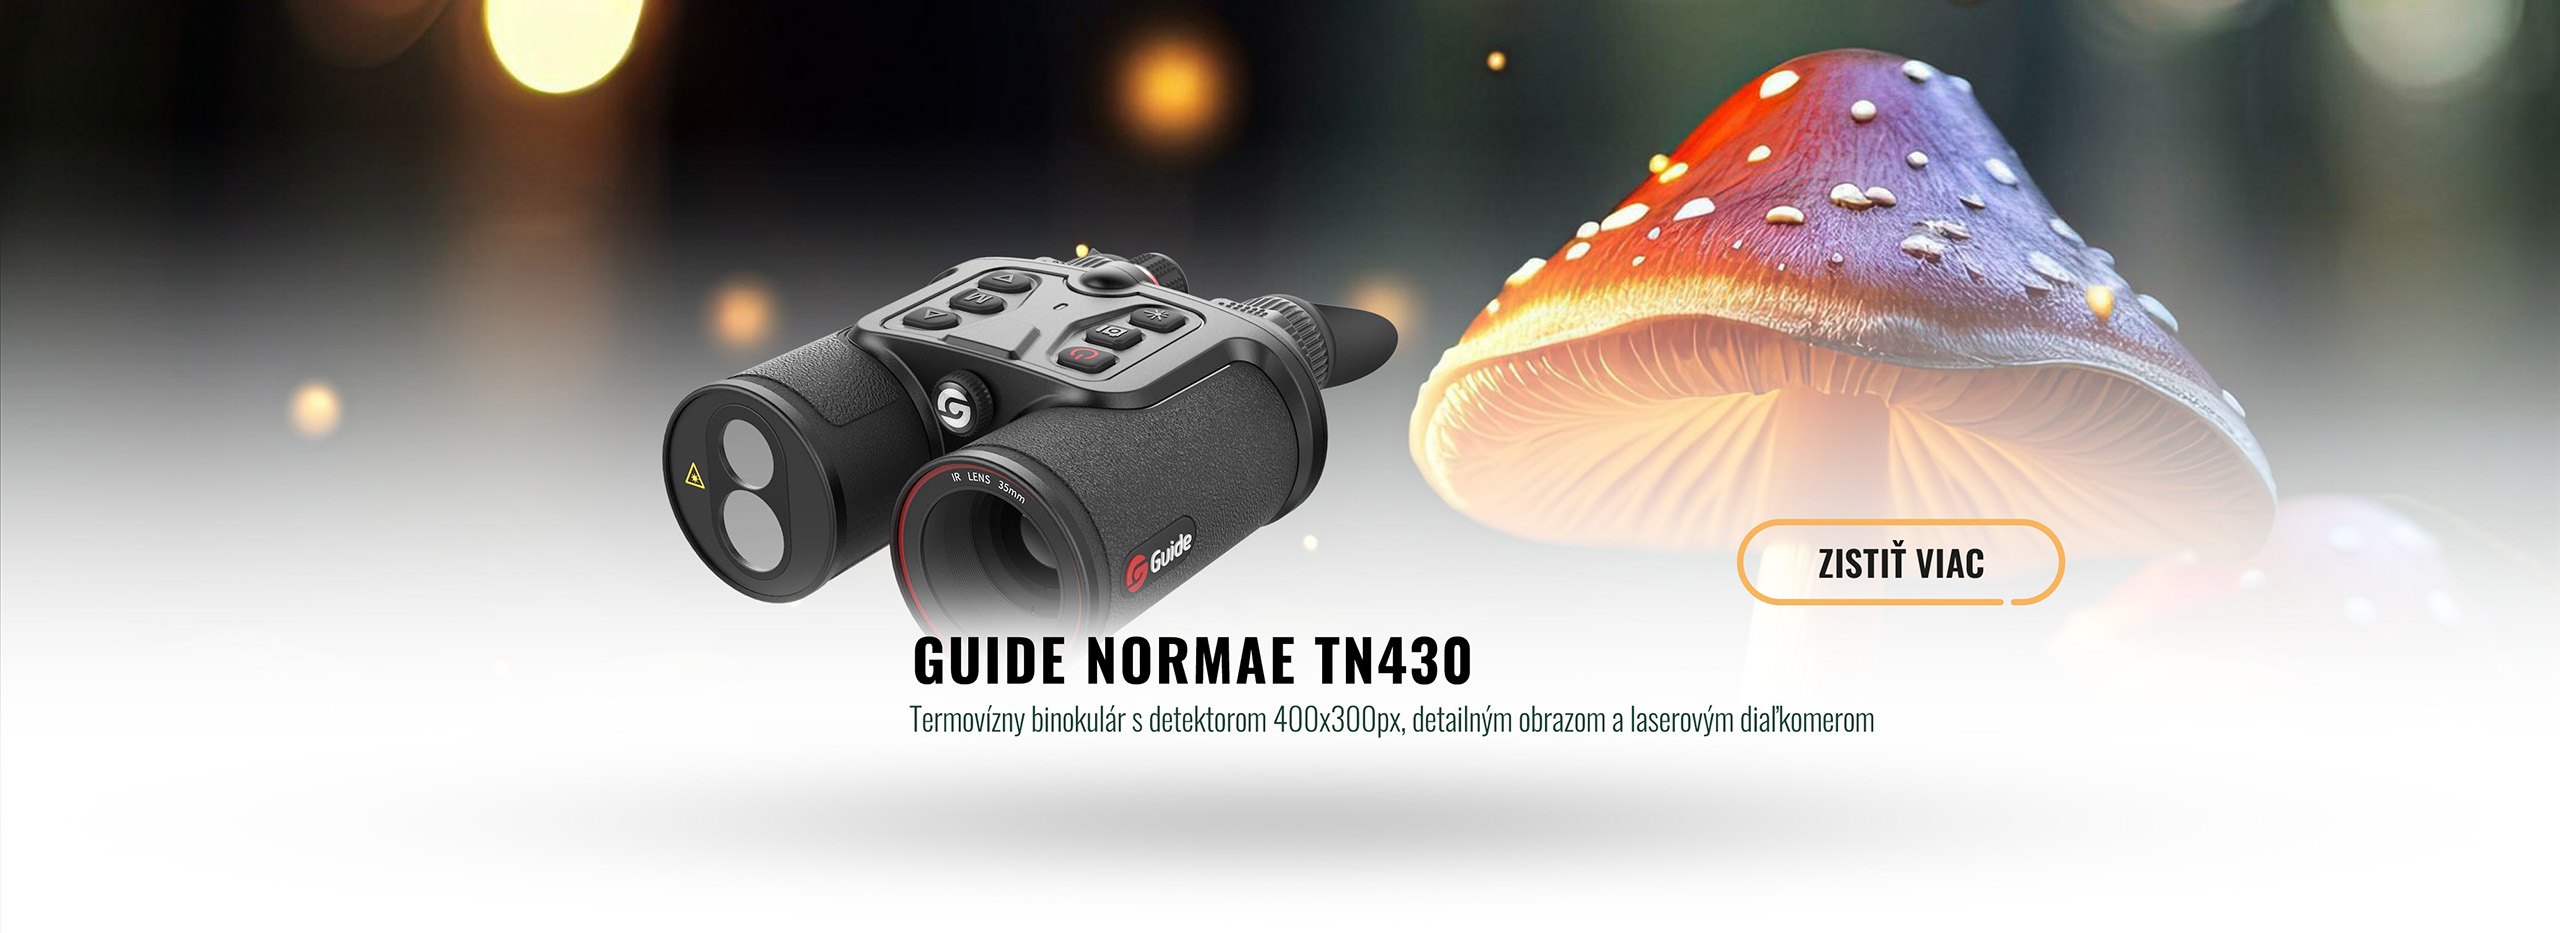 GUIDE NORMAE TN430